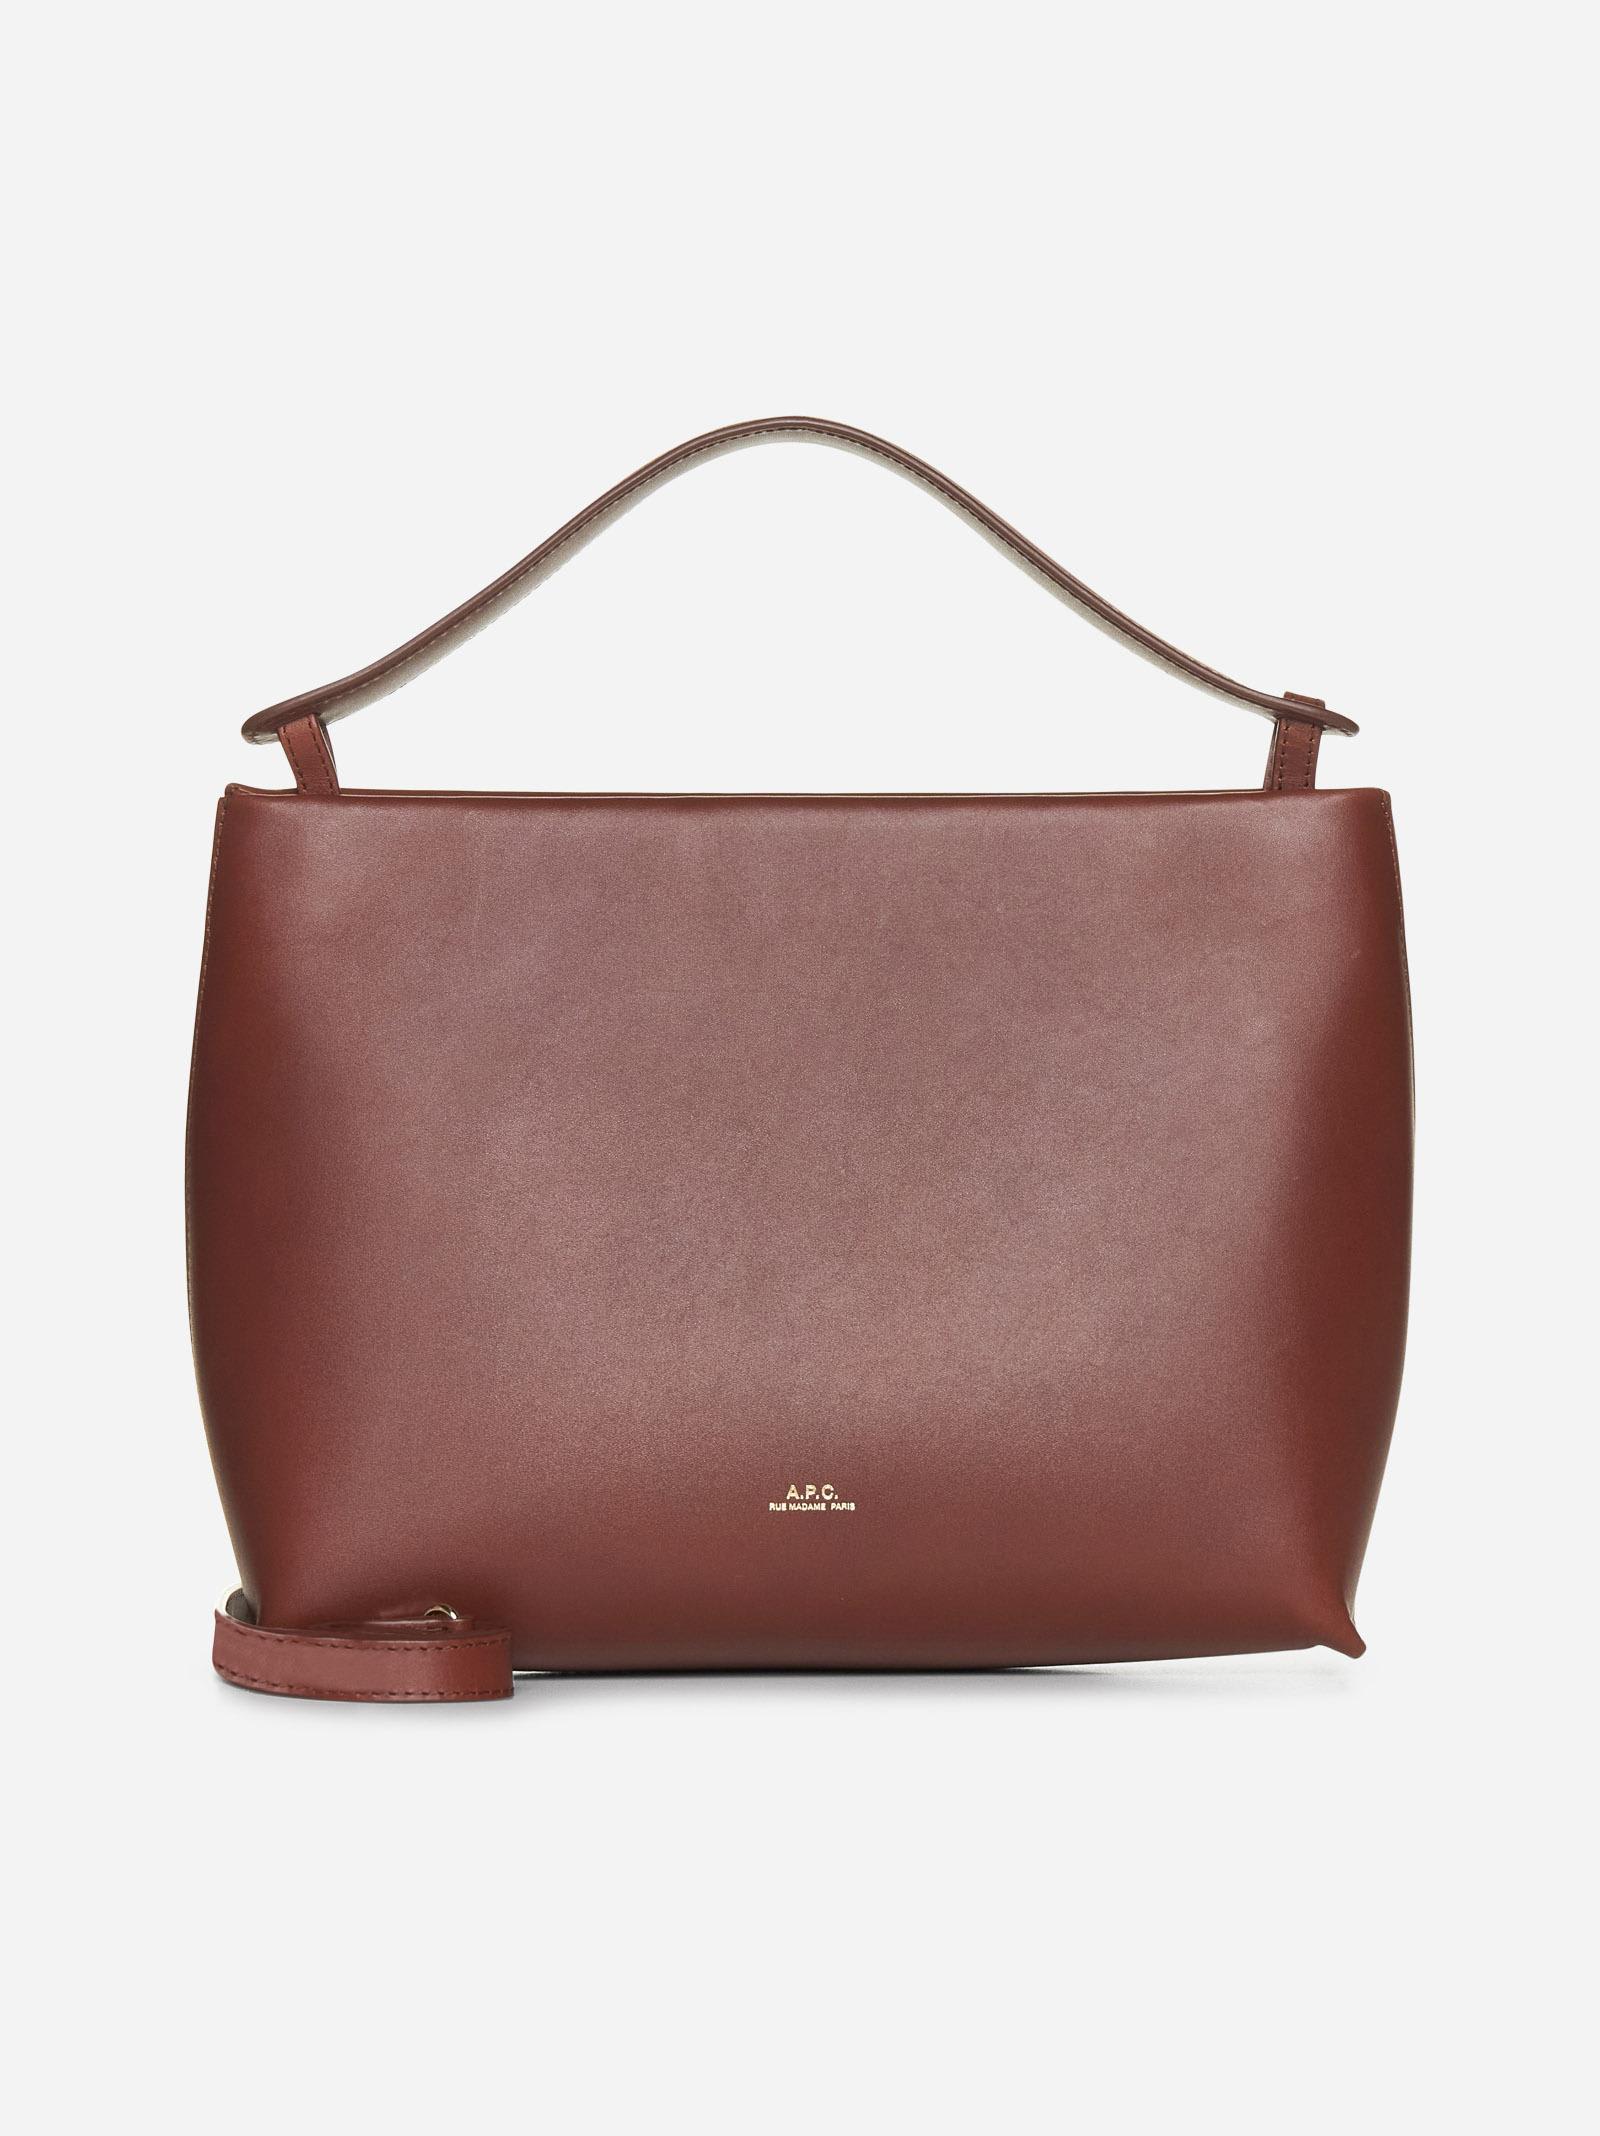 Apc Ashley Leather Bag In Brown